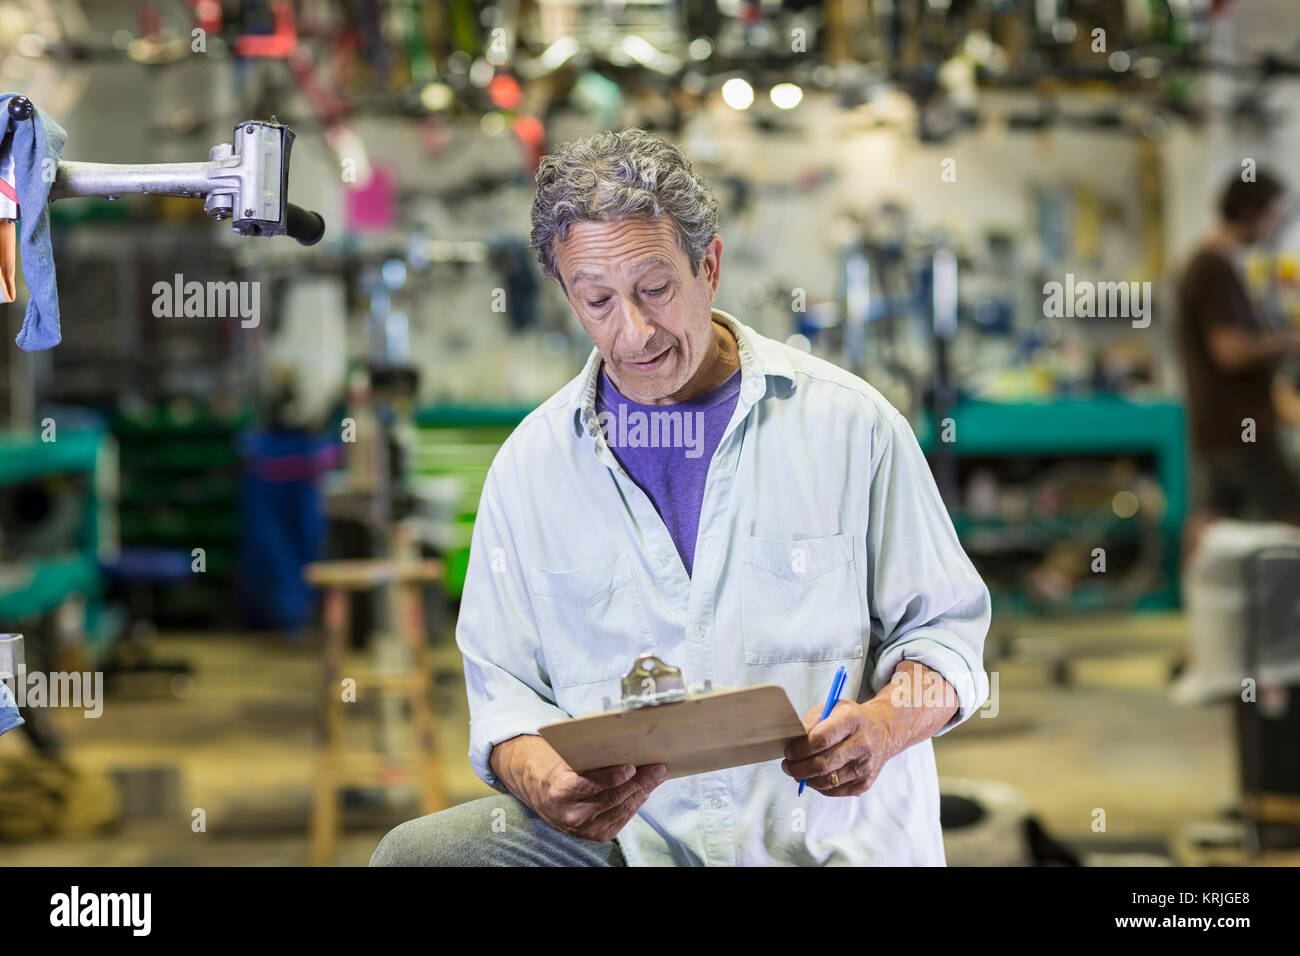 Caucasian man reading clipboard in bicycle shop Stock Photo